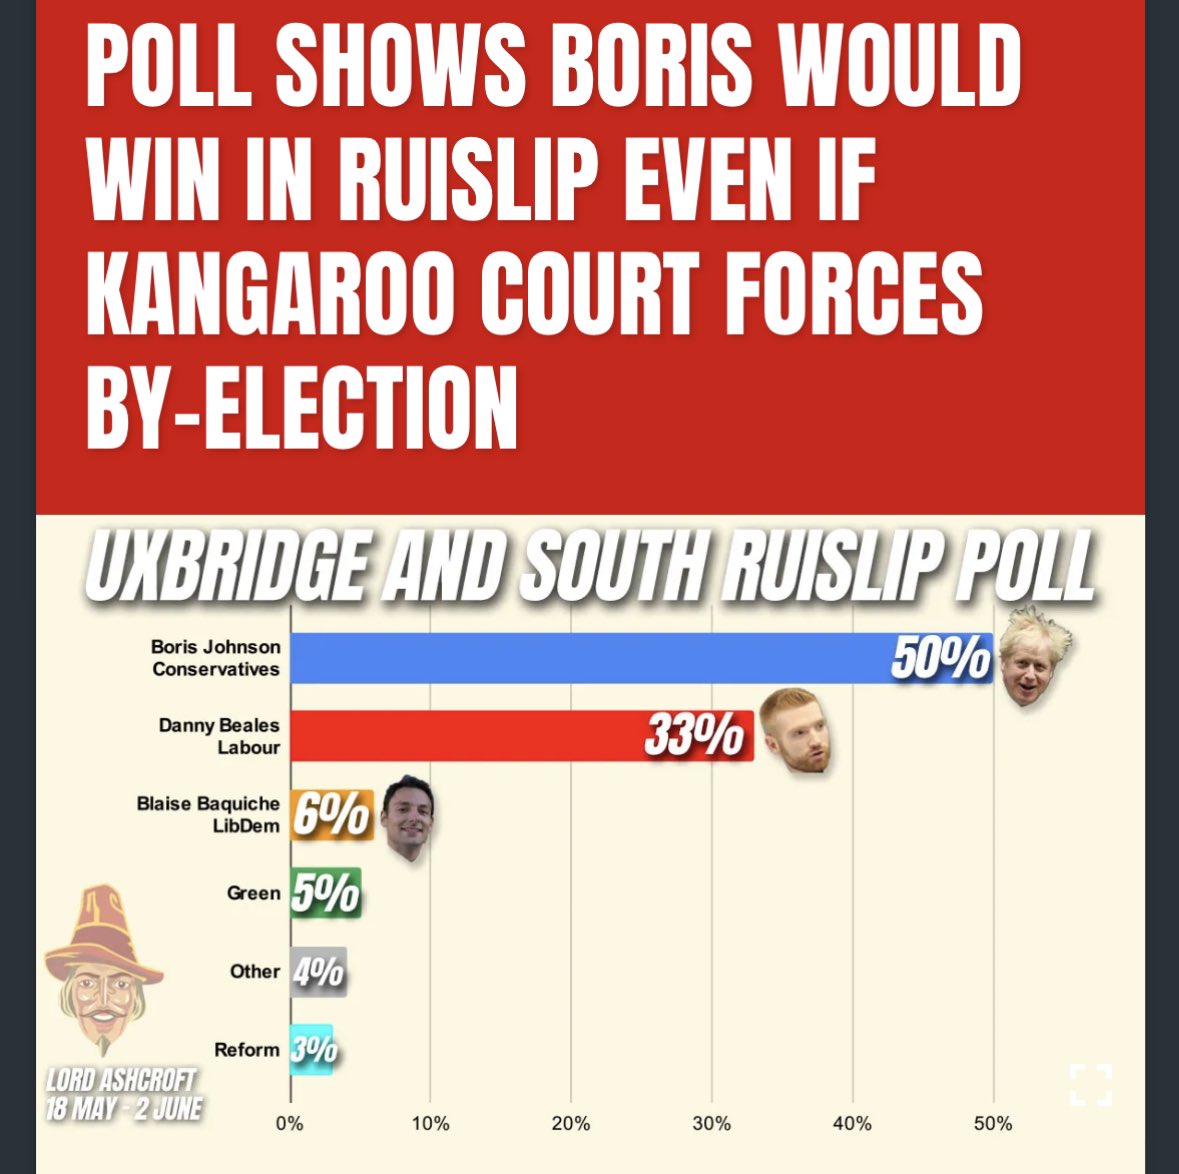 RT @tomhfh: Maybe this @LordAshcroft poll wasn’t as wacky as everyone Twitter said.
https://t.co/f5eYgdR3PM https://t.co/qe9H14YExk